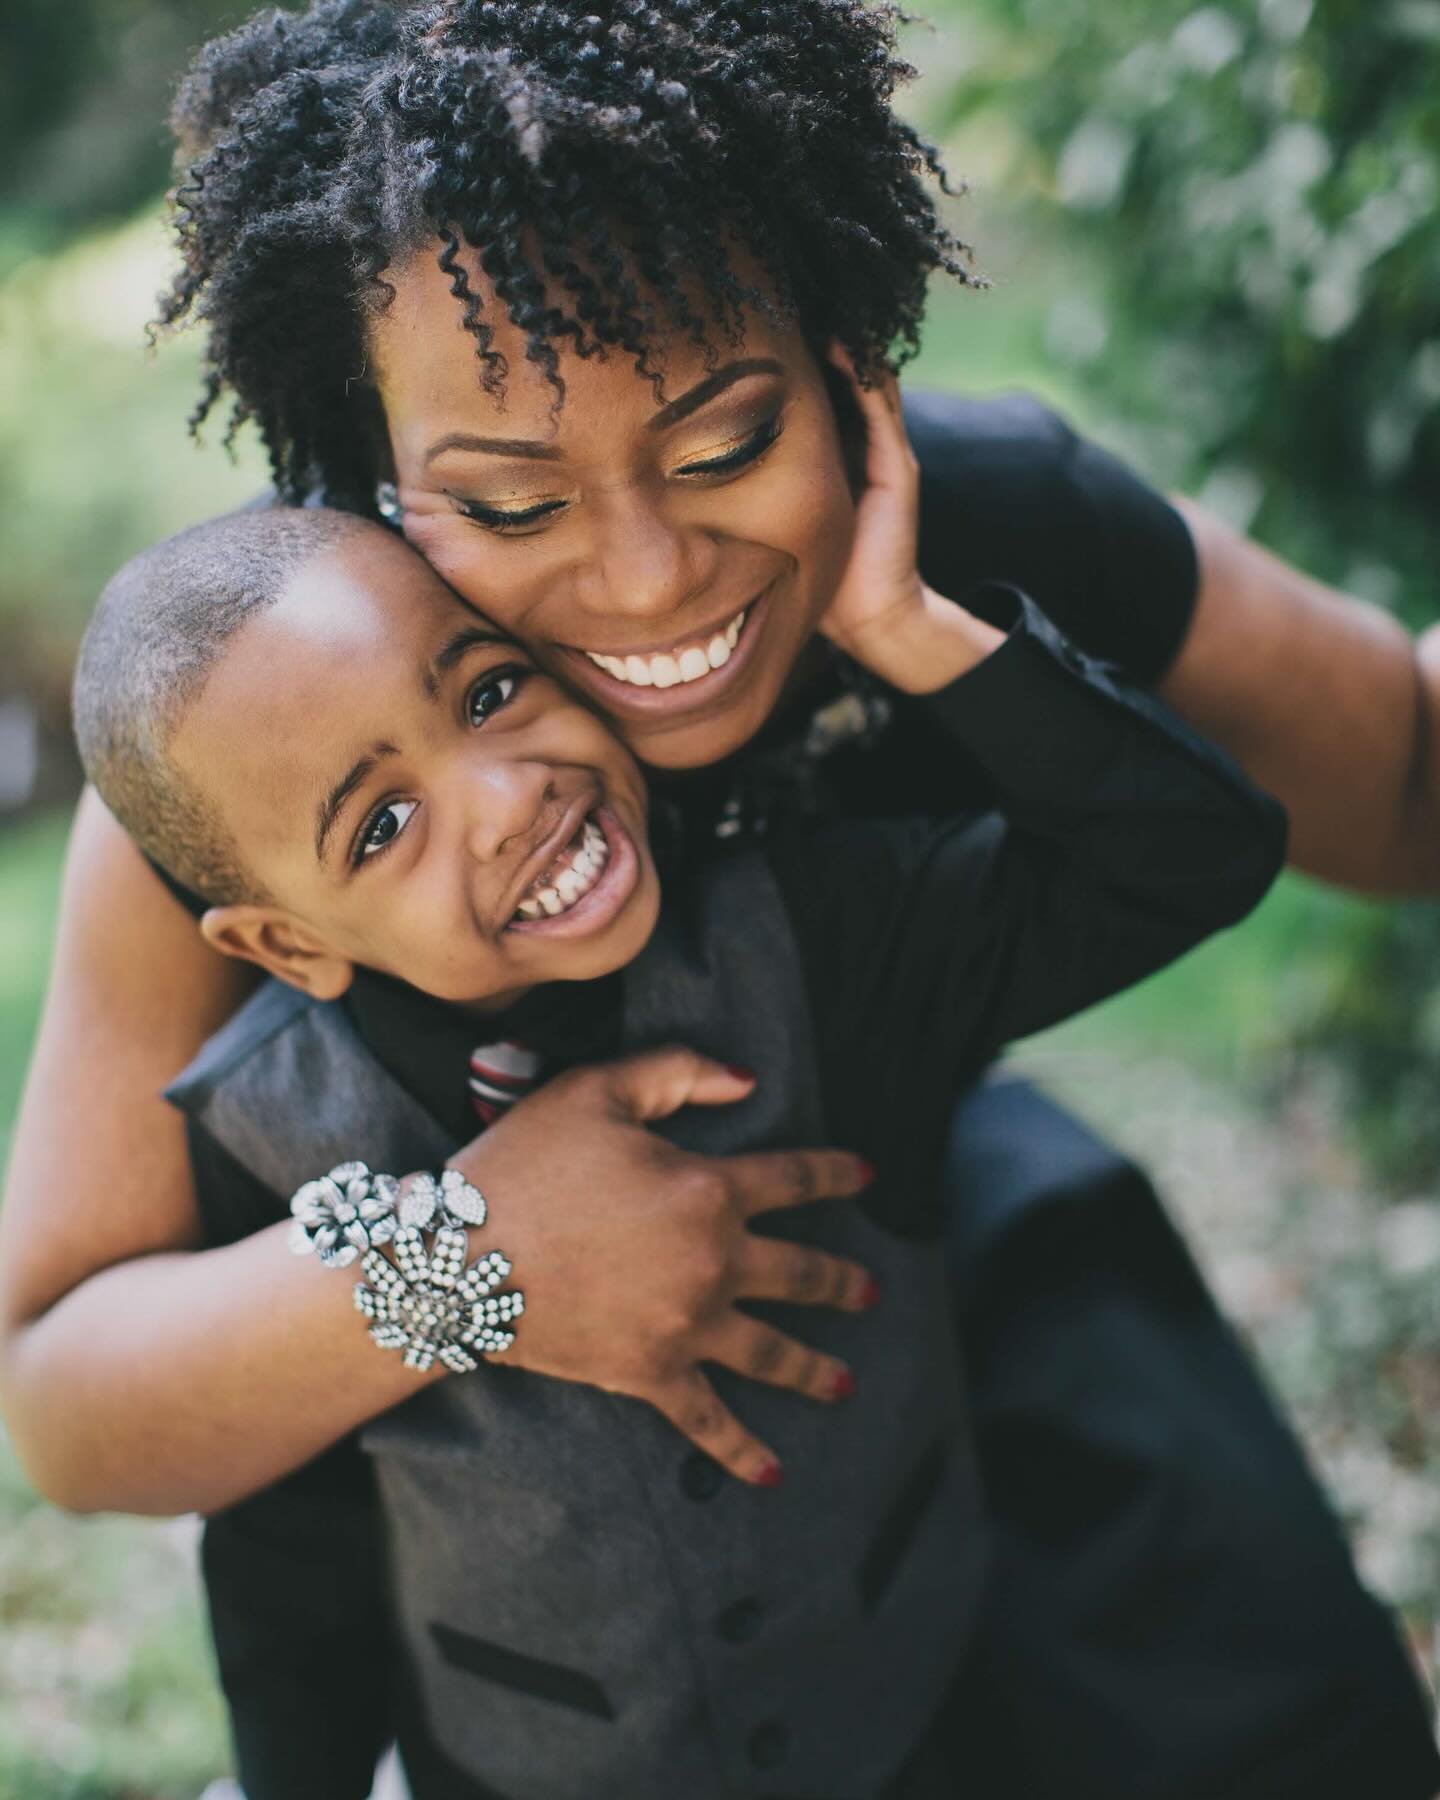 #FBF to my first &ldquo;Mommy and me&rdquo; photo session with my son, weeks before my divorce was finalized. I don&rsquo;t remember what prompted me to book the session, but I&rsquo;m glad I did. The photos are a reminder of how far my son and I hav